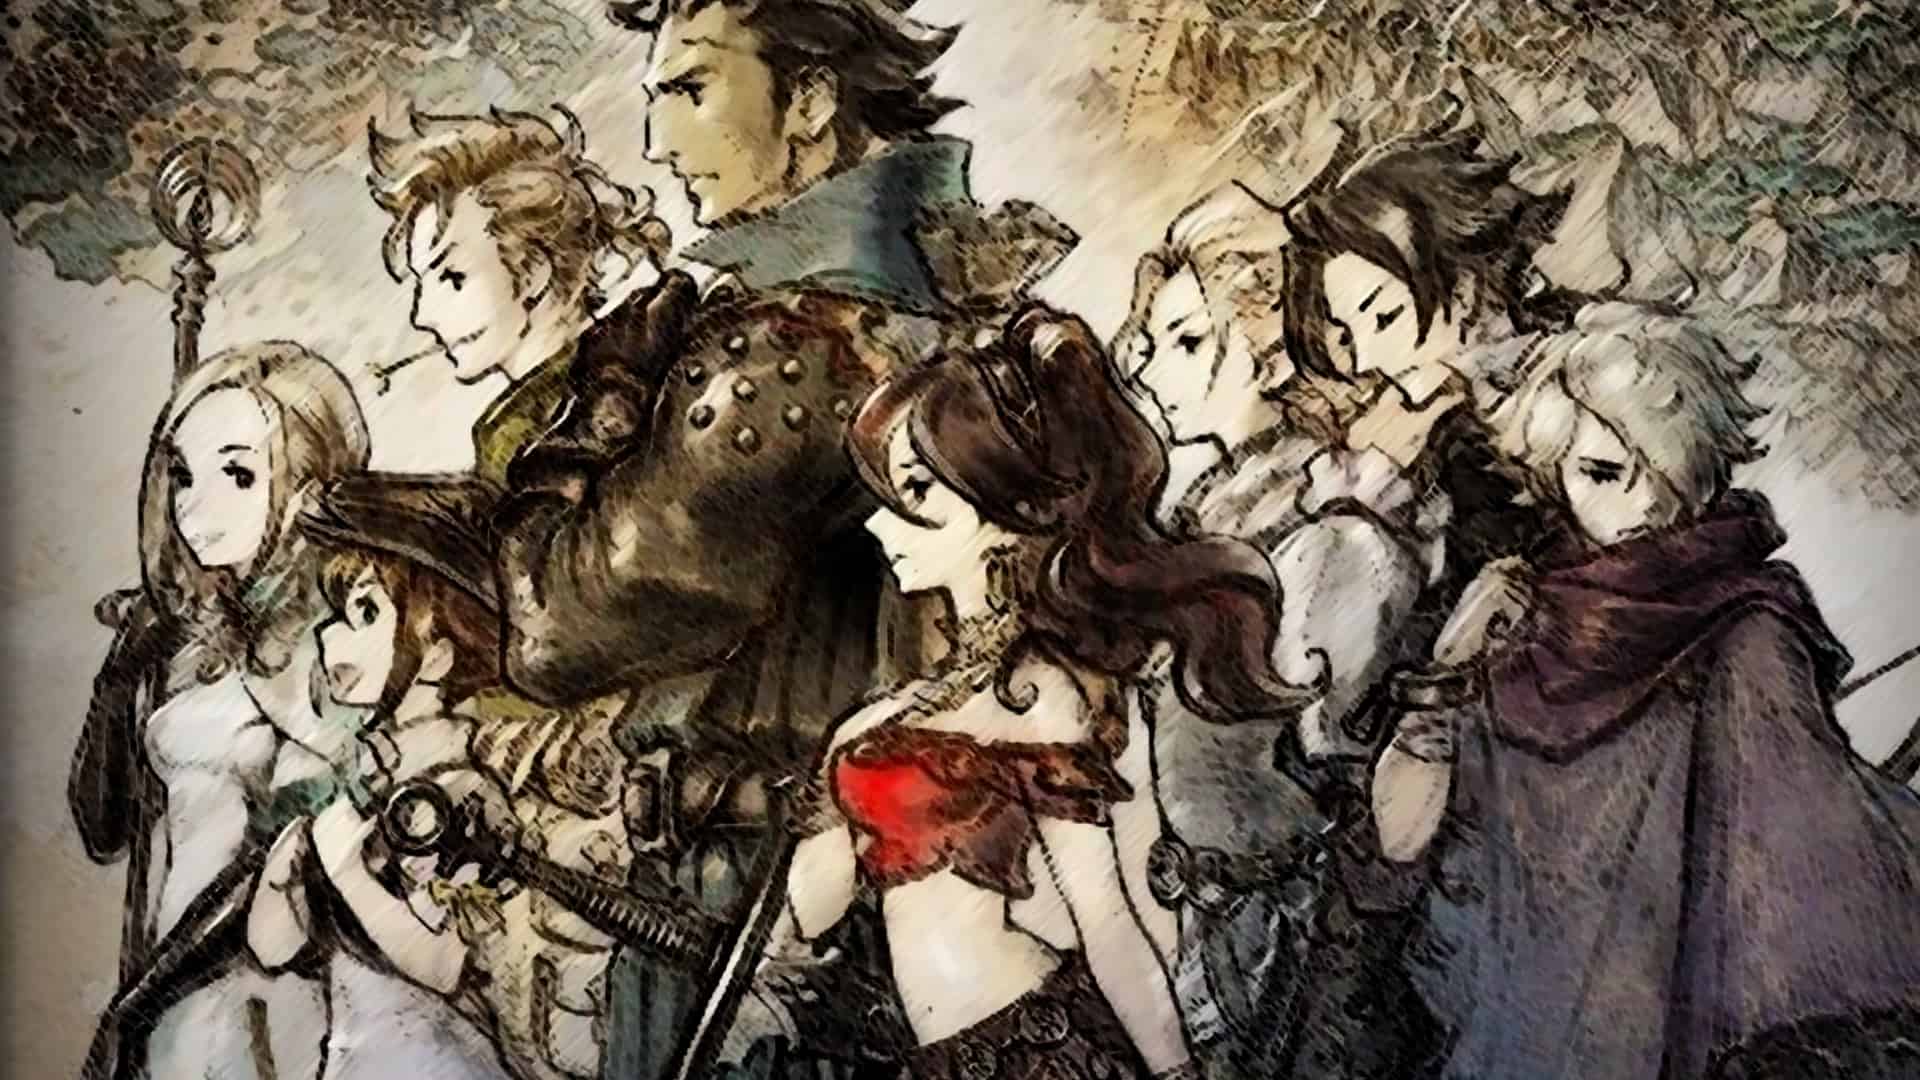 octopath traveler ps4 download